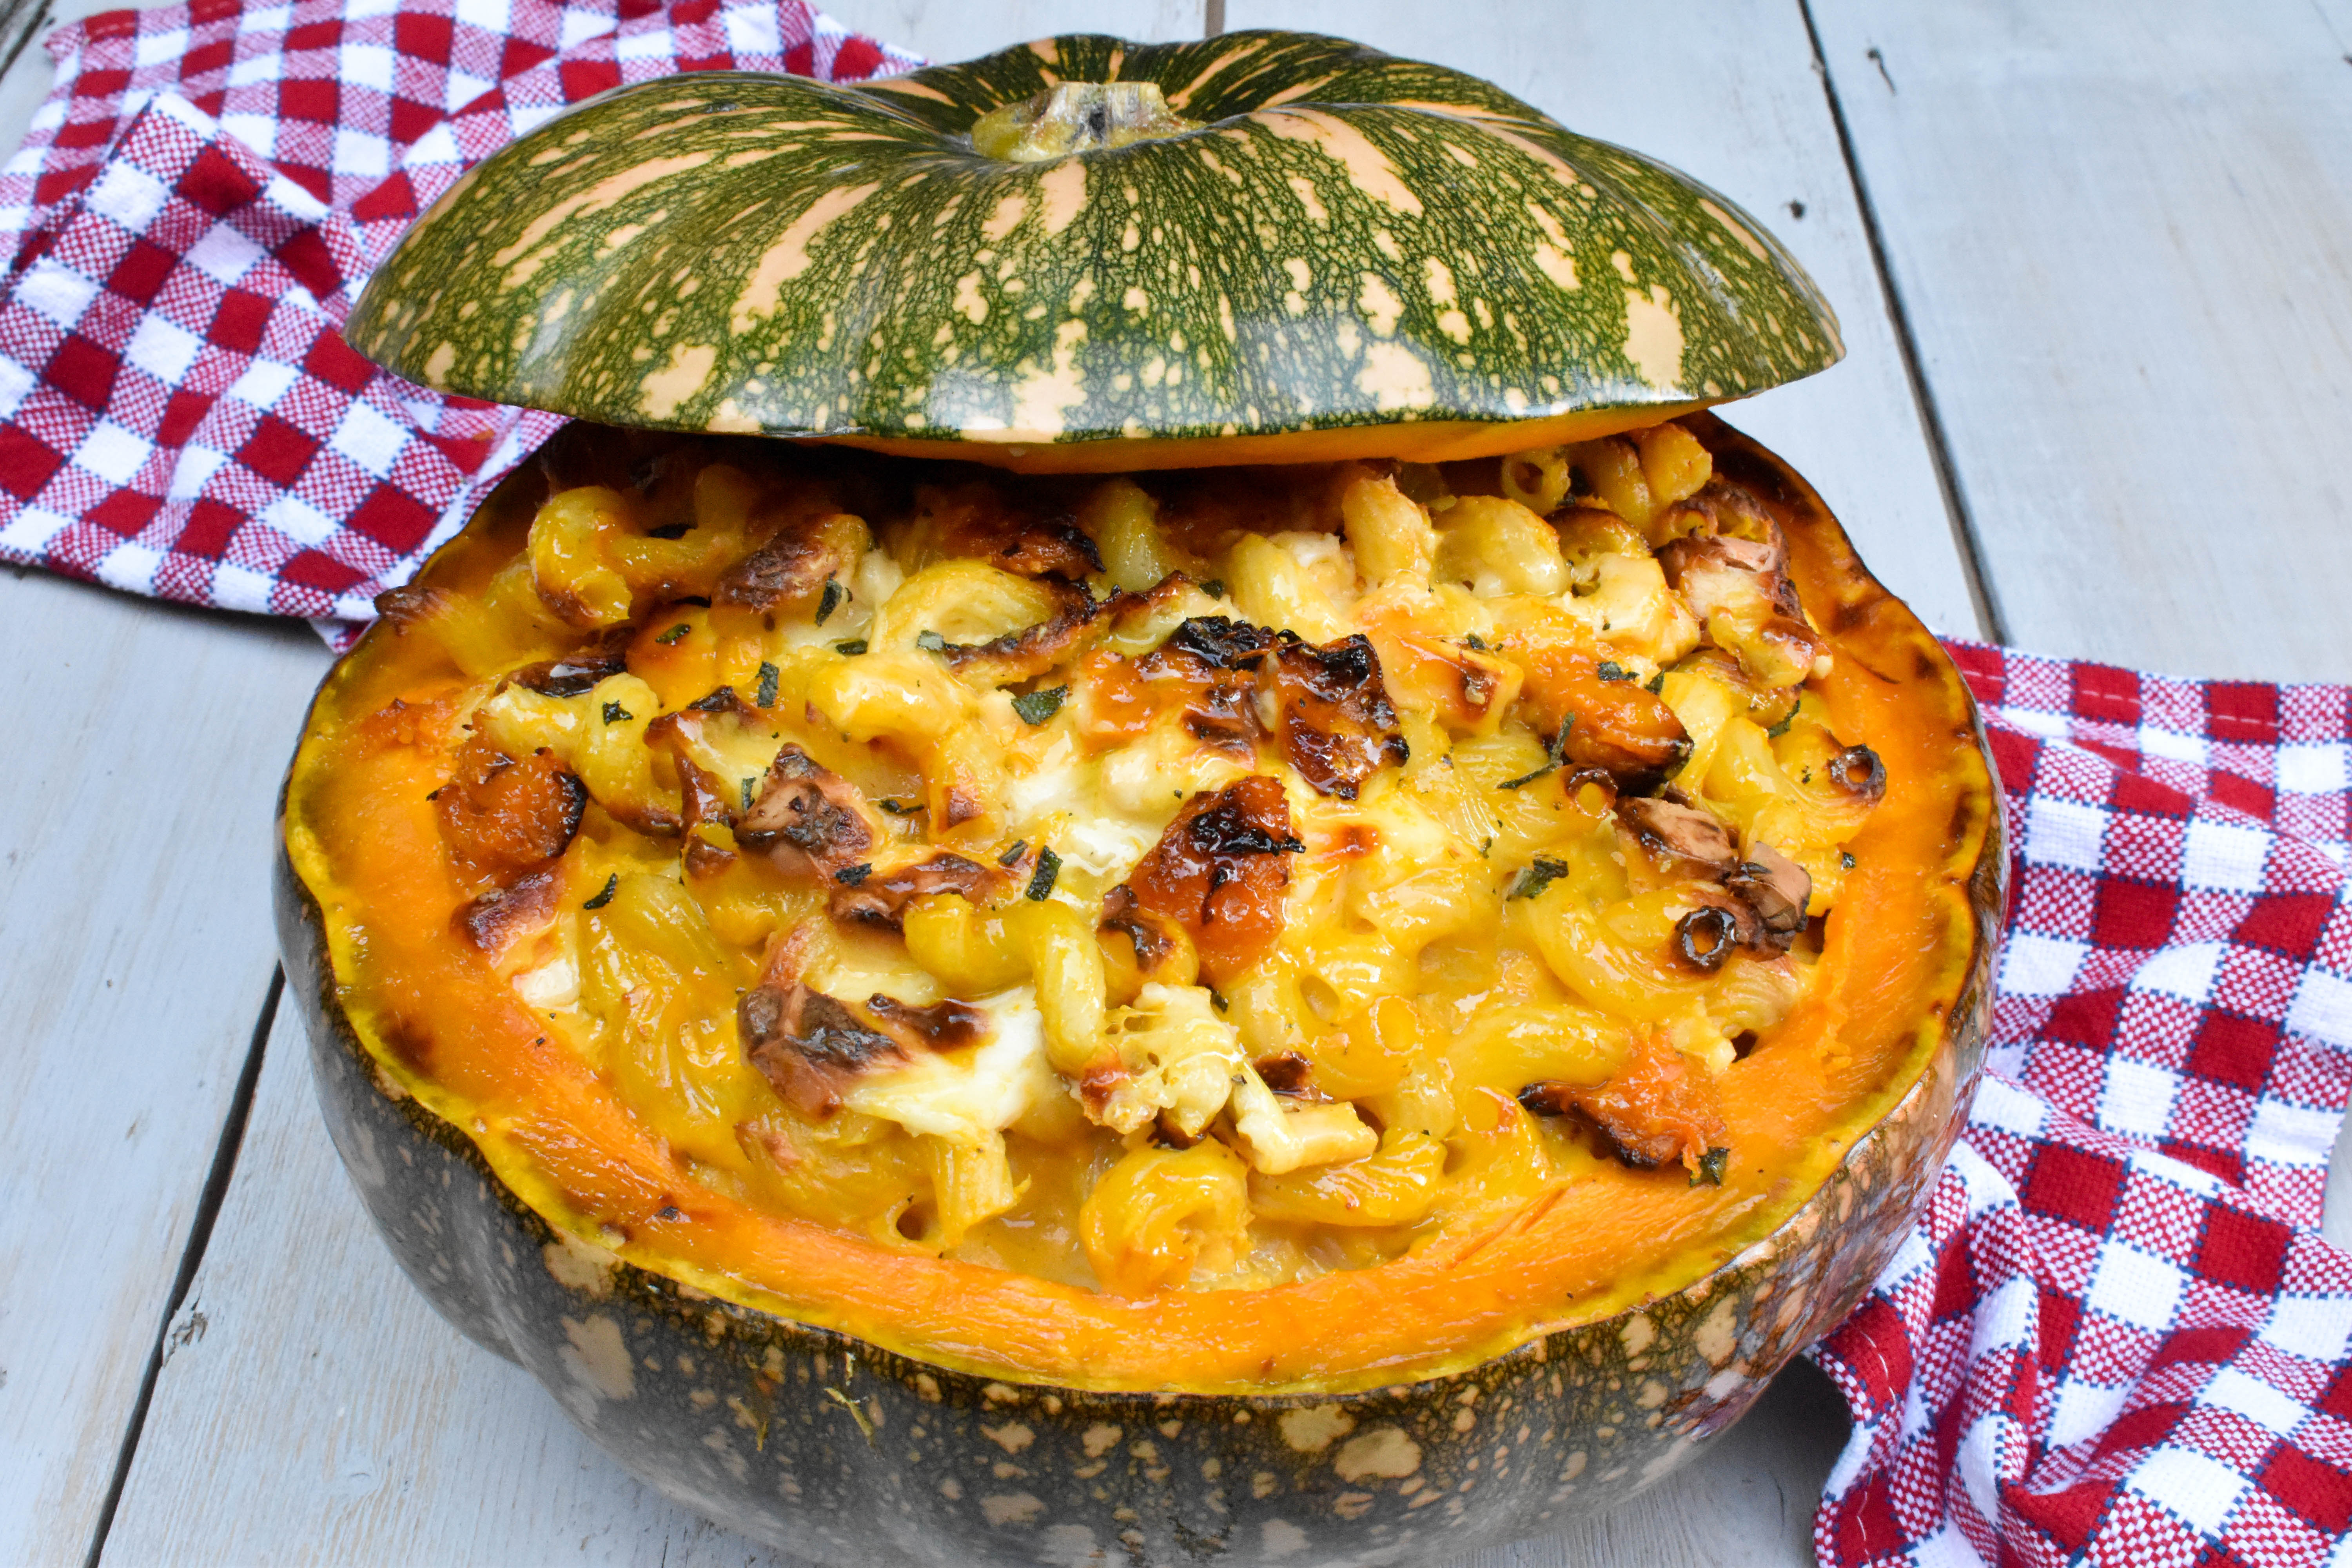 Looking for Halloween food ideas? Italian Spoon’s top 5 pumpkin recipes of all time!